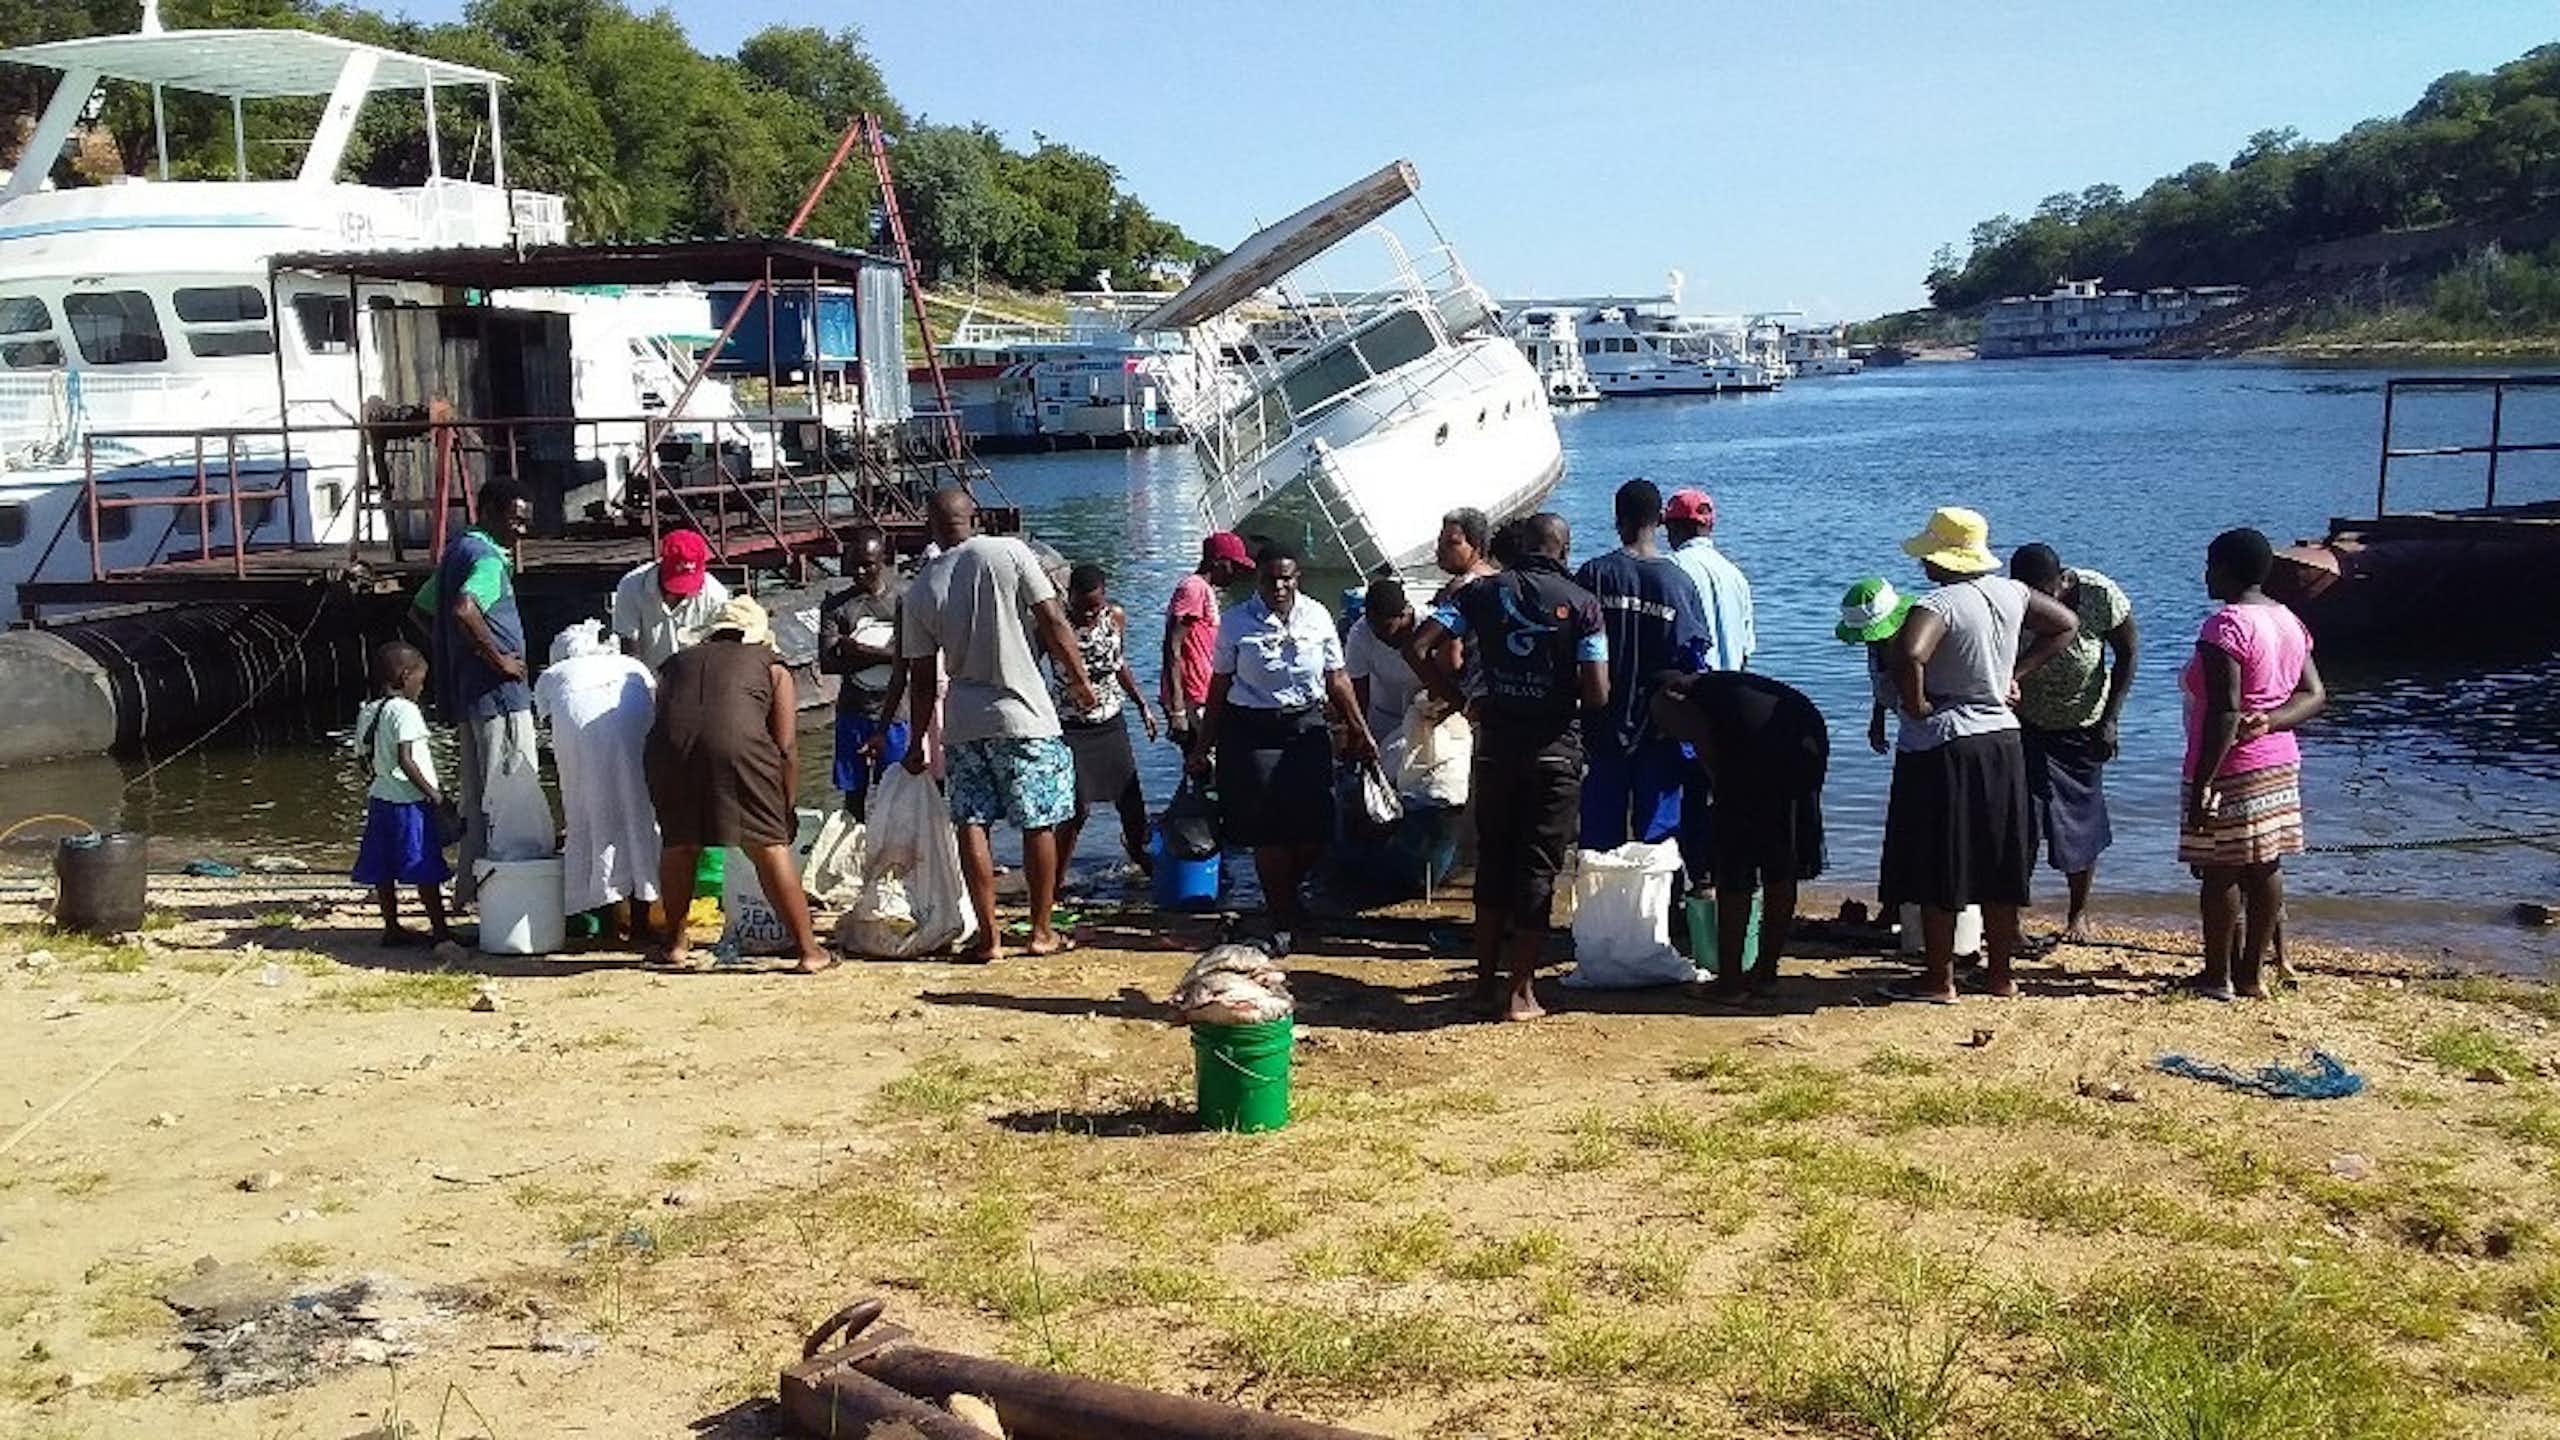 About 18 people stand on the shores of Lake Kariba near small fishing trawlers buying and selling fish